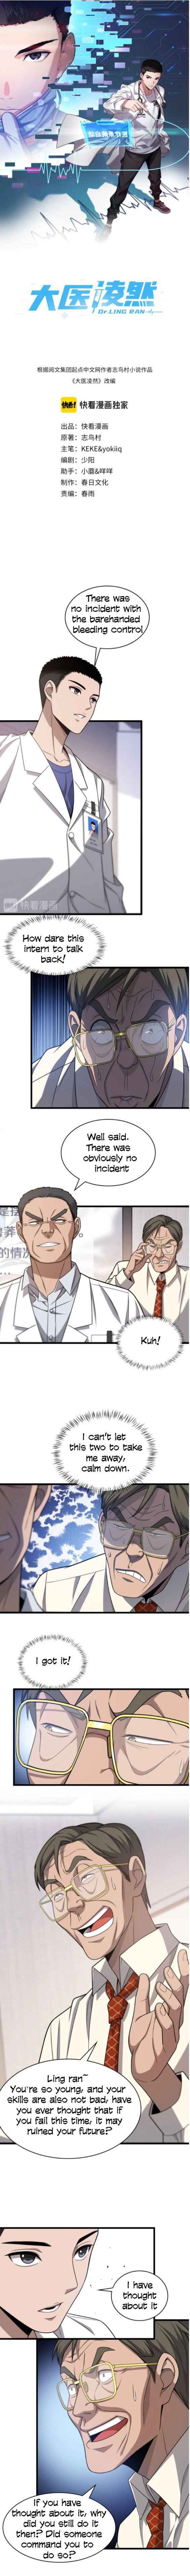 great_doctor_ling_ran_18_1